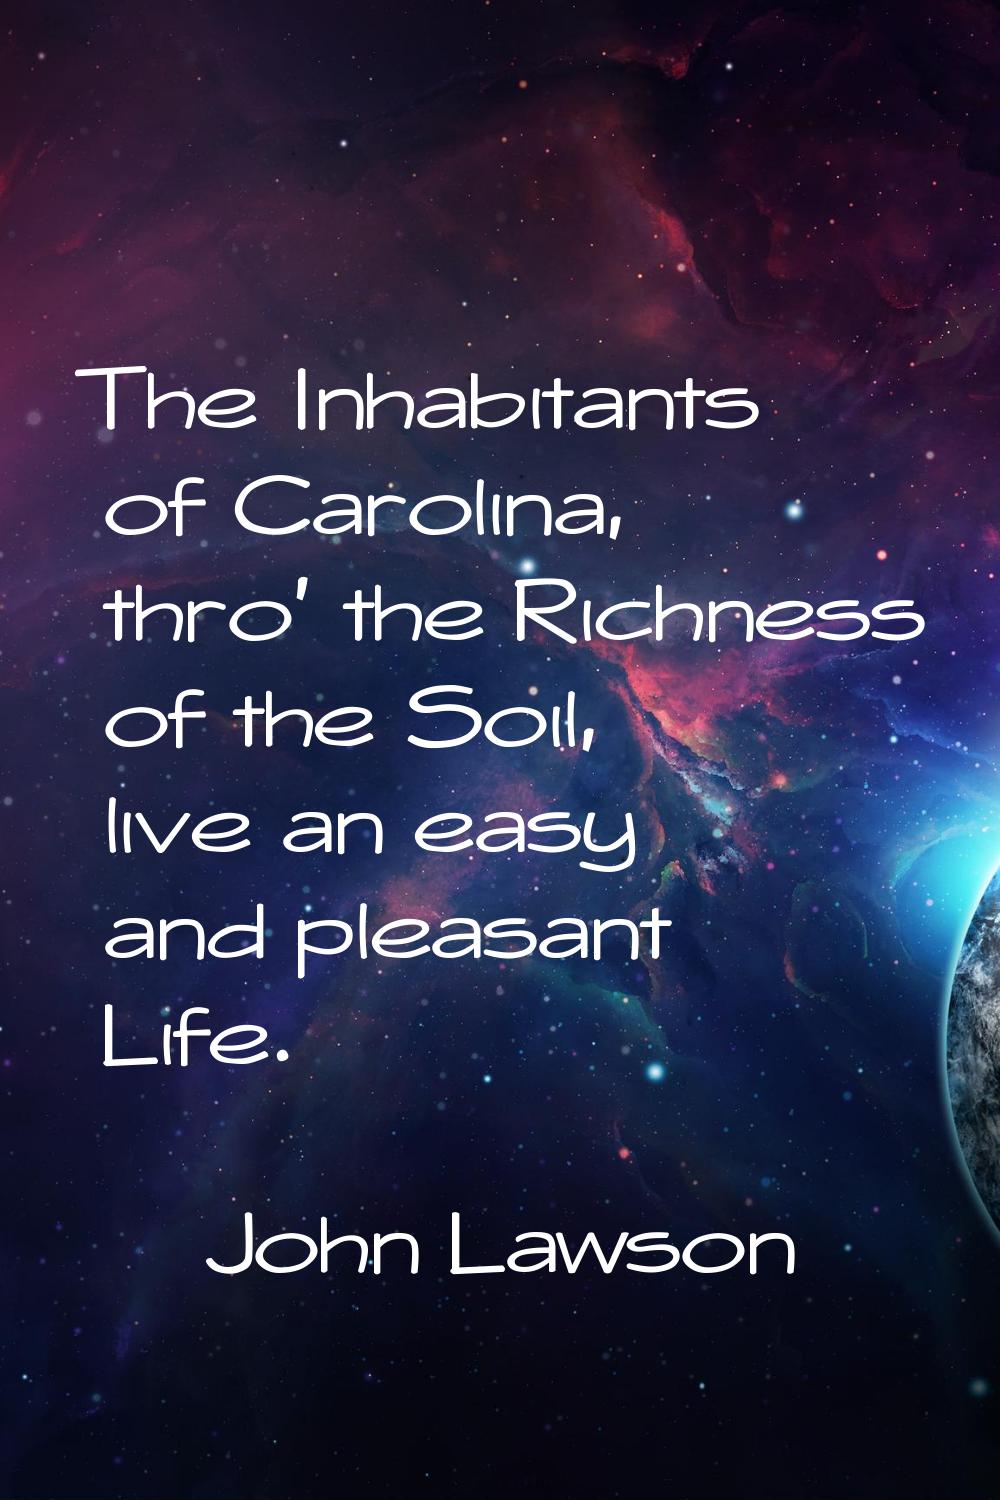 The Inhabitants of Carolina, thro' the Richness of the Soil, live an easy and pleasant Life.